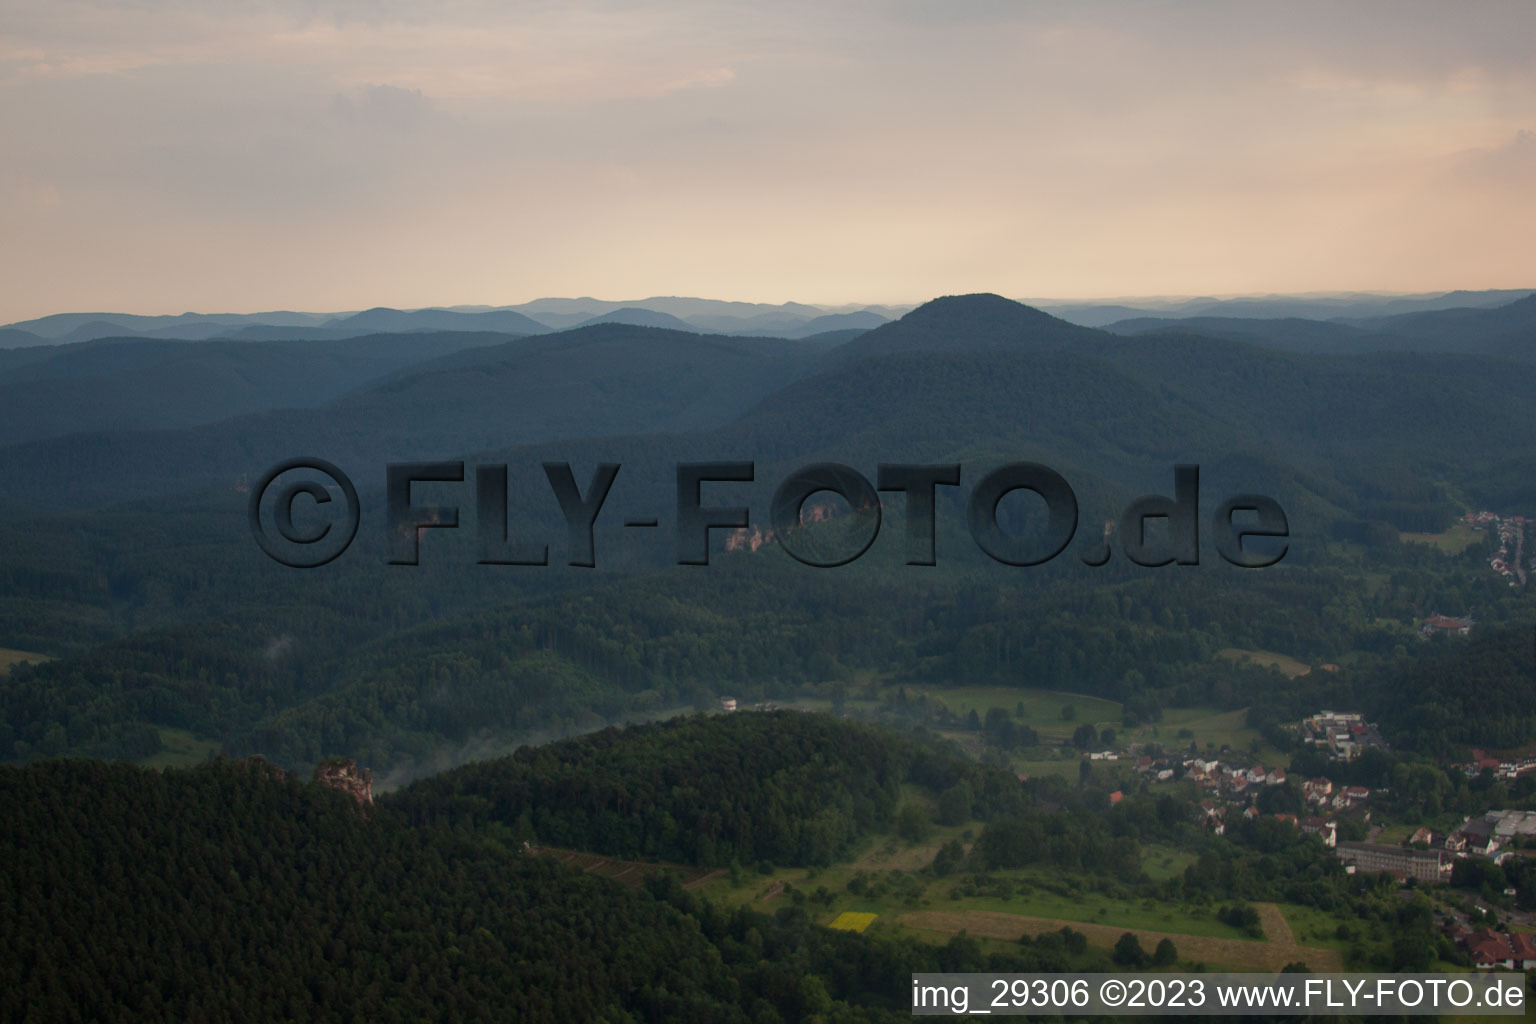 Dahn in the state Rhineland-Palatinate, Germany from the drone perspective